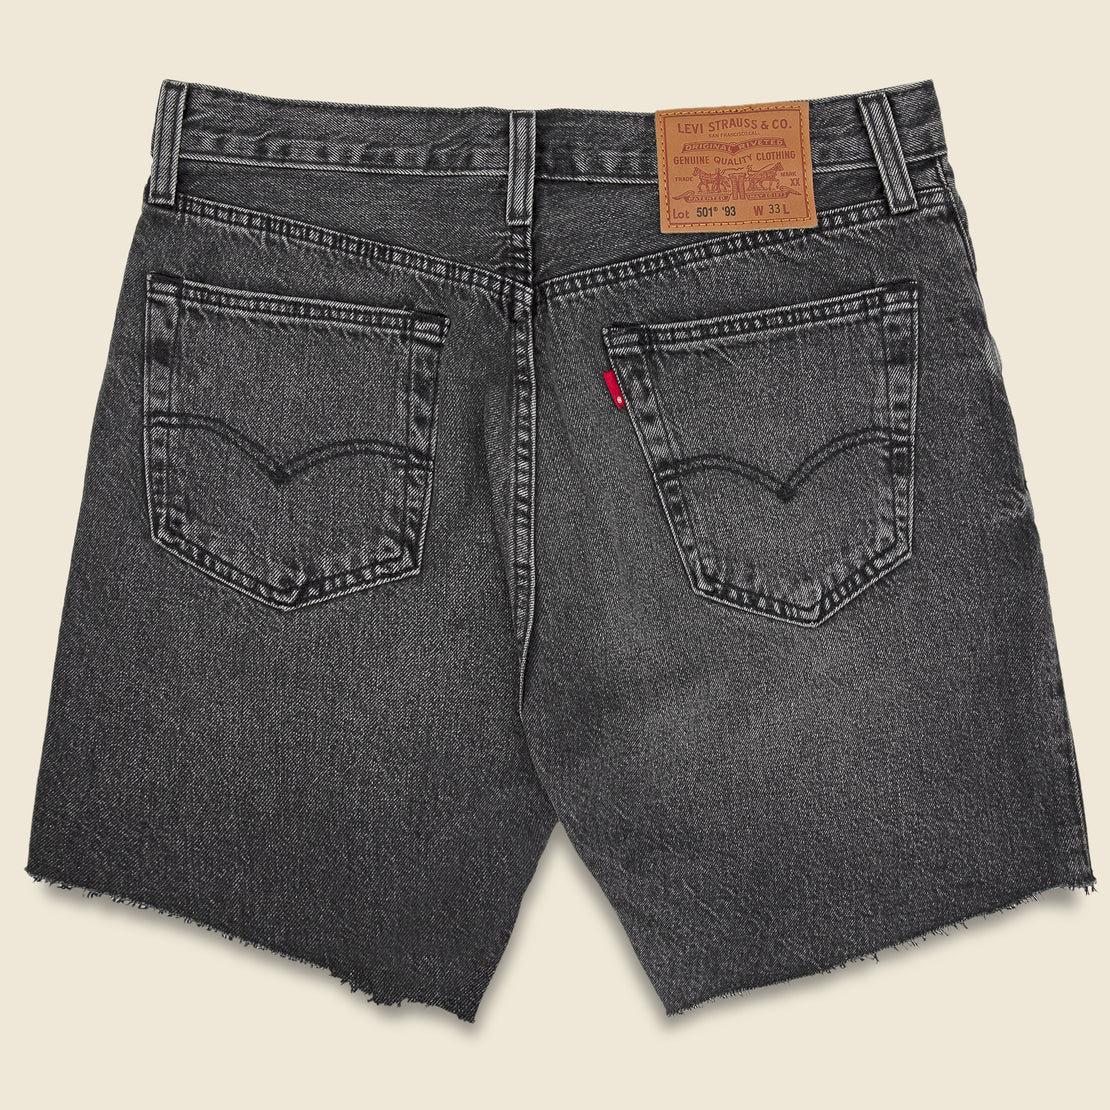 501 '93 Shorts - Midnight Metal - Levis Premium - STAG Provisions - Shorts - Solid